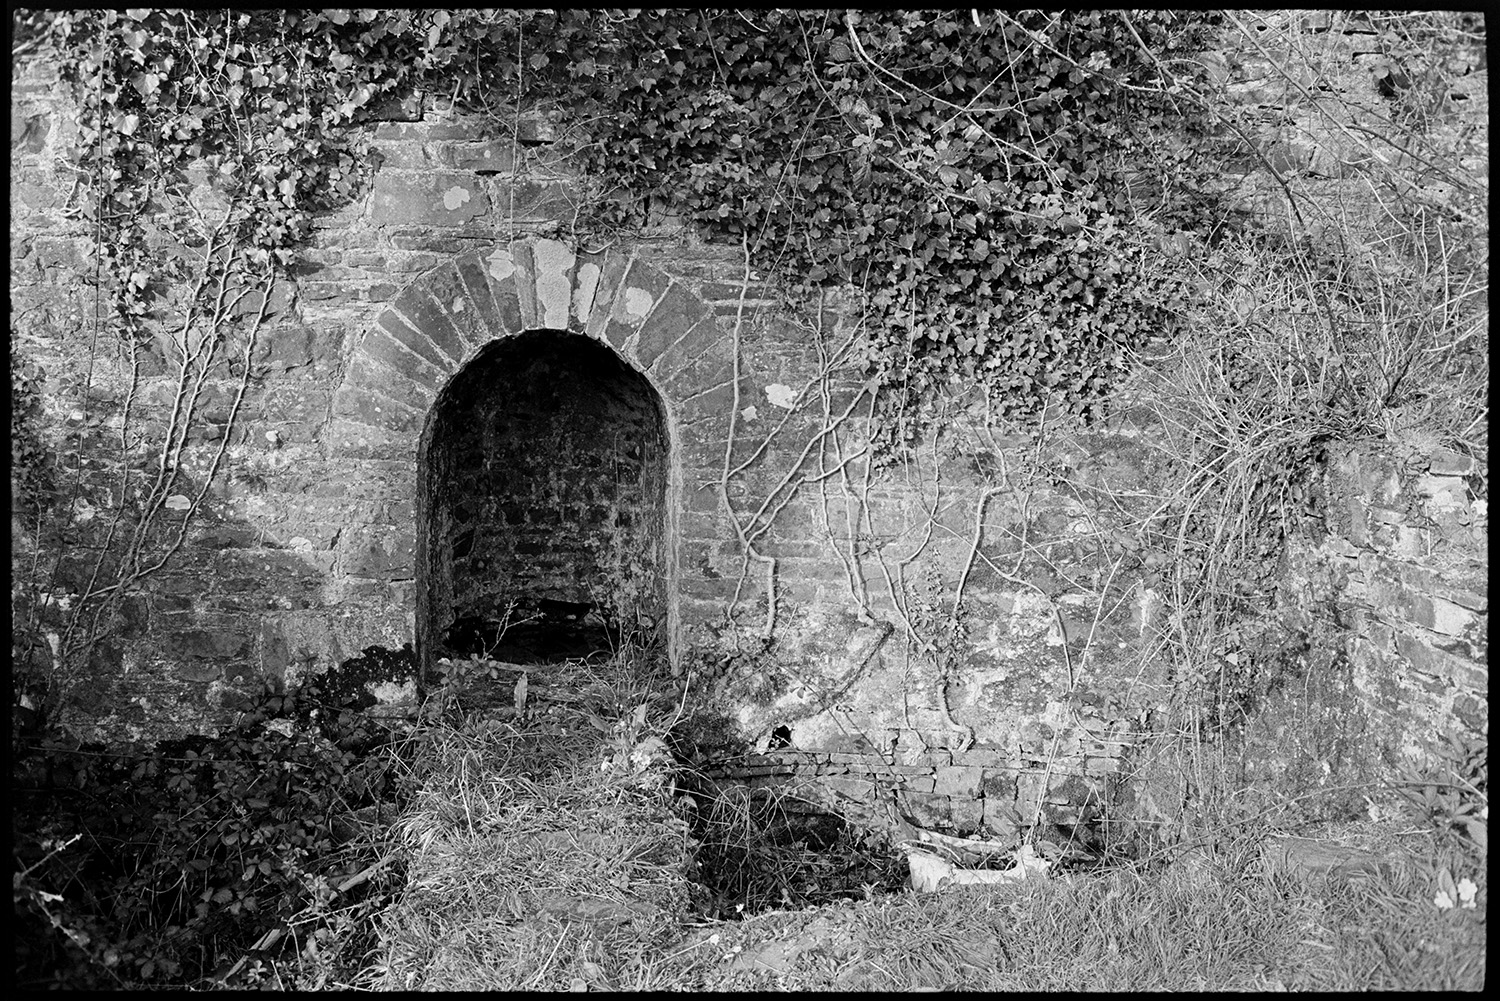 Cistern with niche, ancient washing place? For monks?  Near river. <br />
[A cistern in a stone wall overgrown with ivy near Beaford Mill. See the 'Additional notes by James Ravilious' field for more information'.]